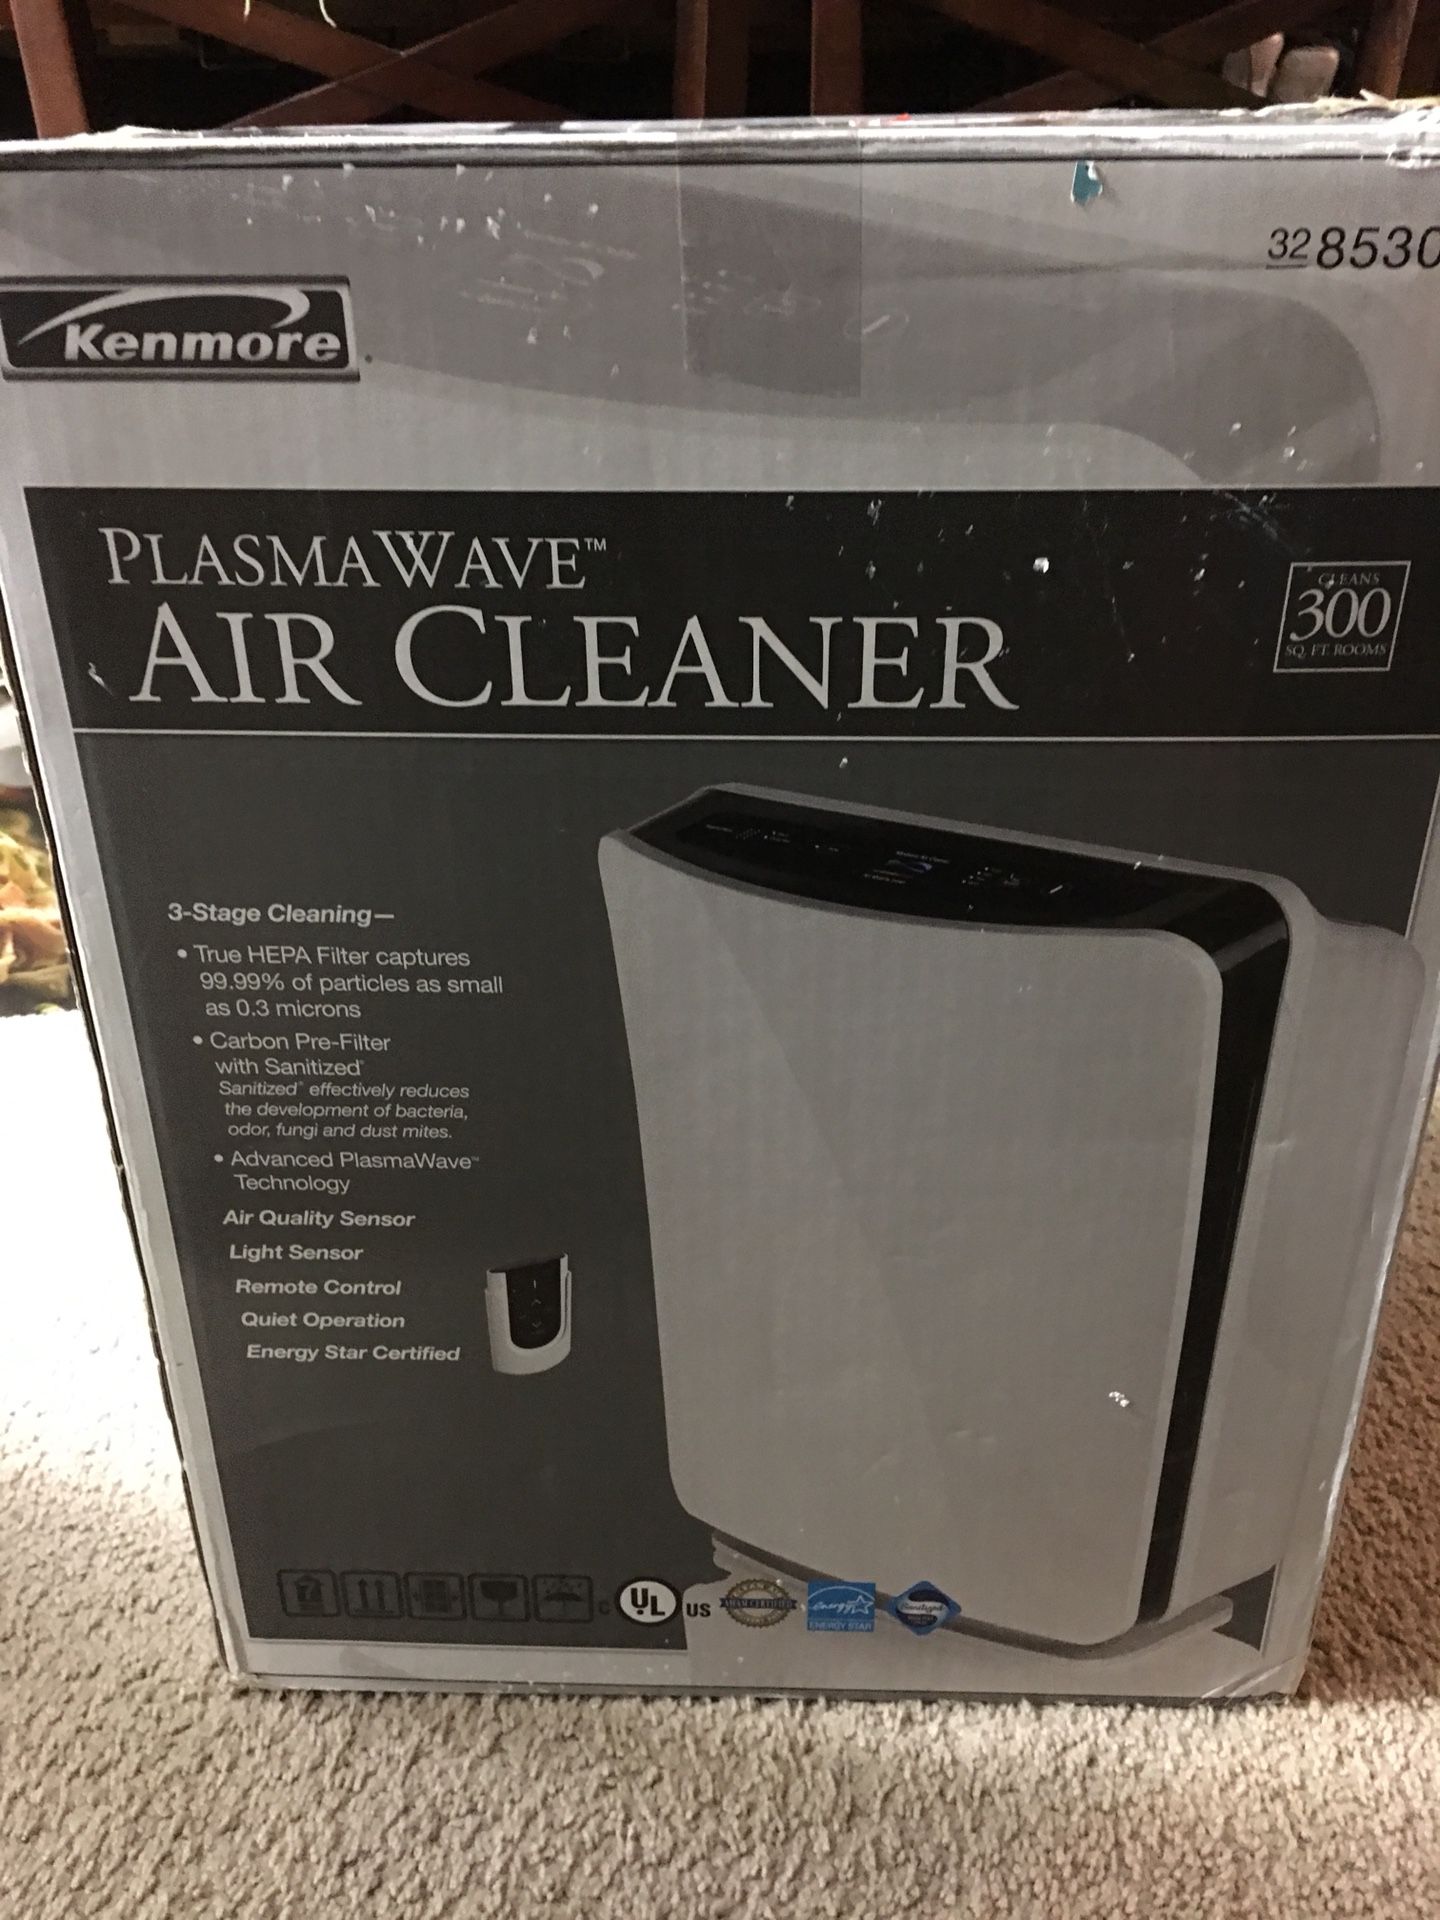 Plasma Wave air cleaner Kenmore excellent condition